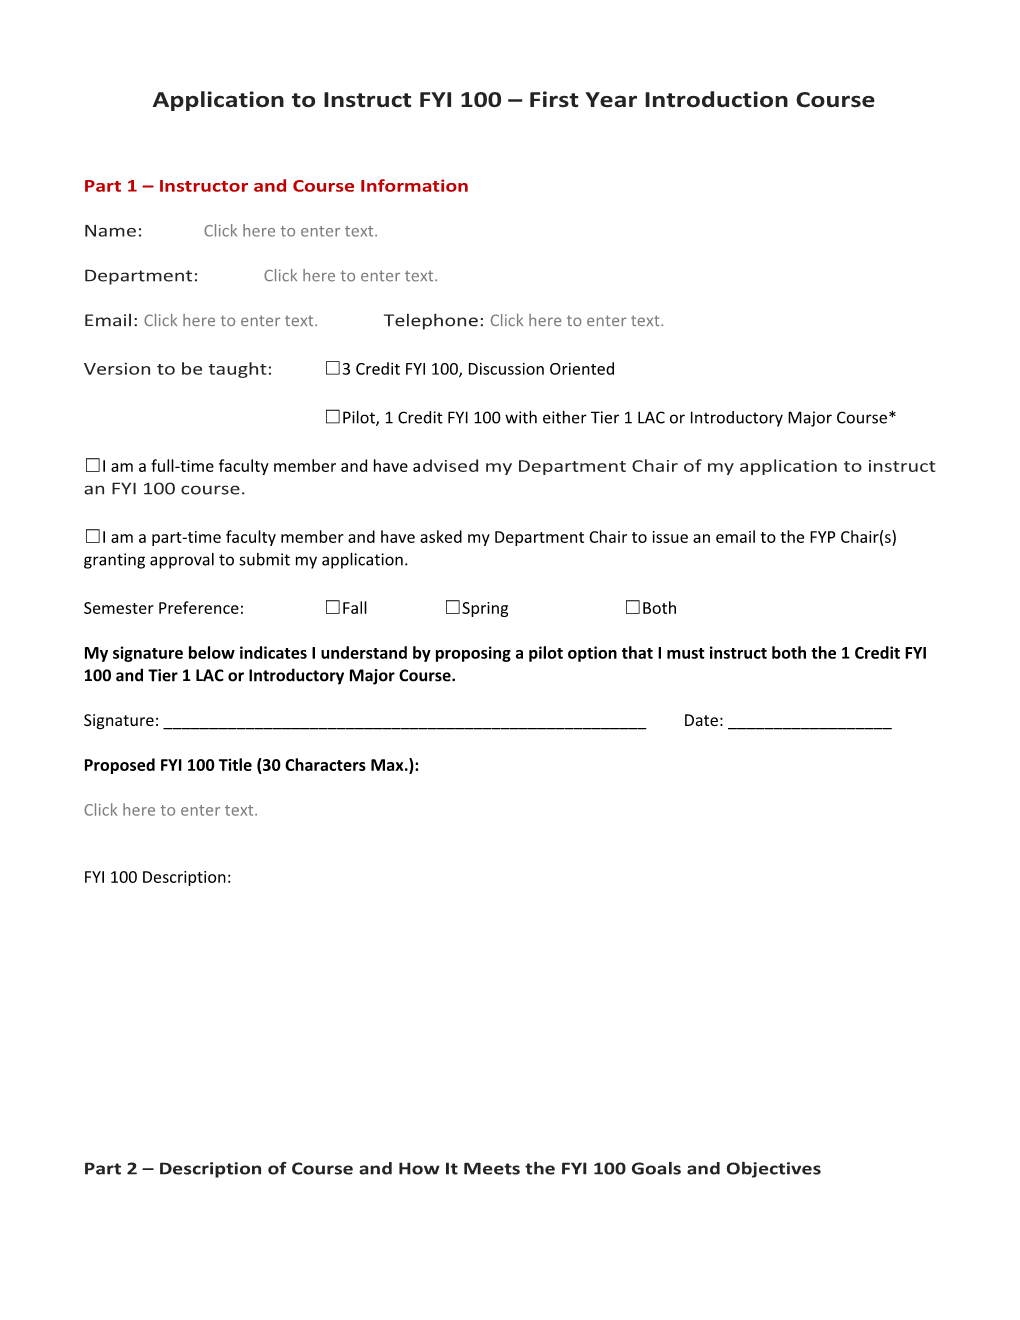 Application to Instruct FYI 100 First Year Introduction Course